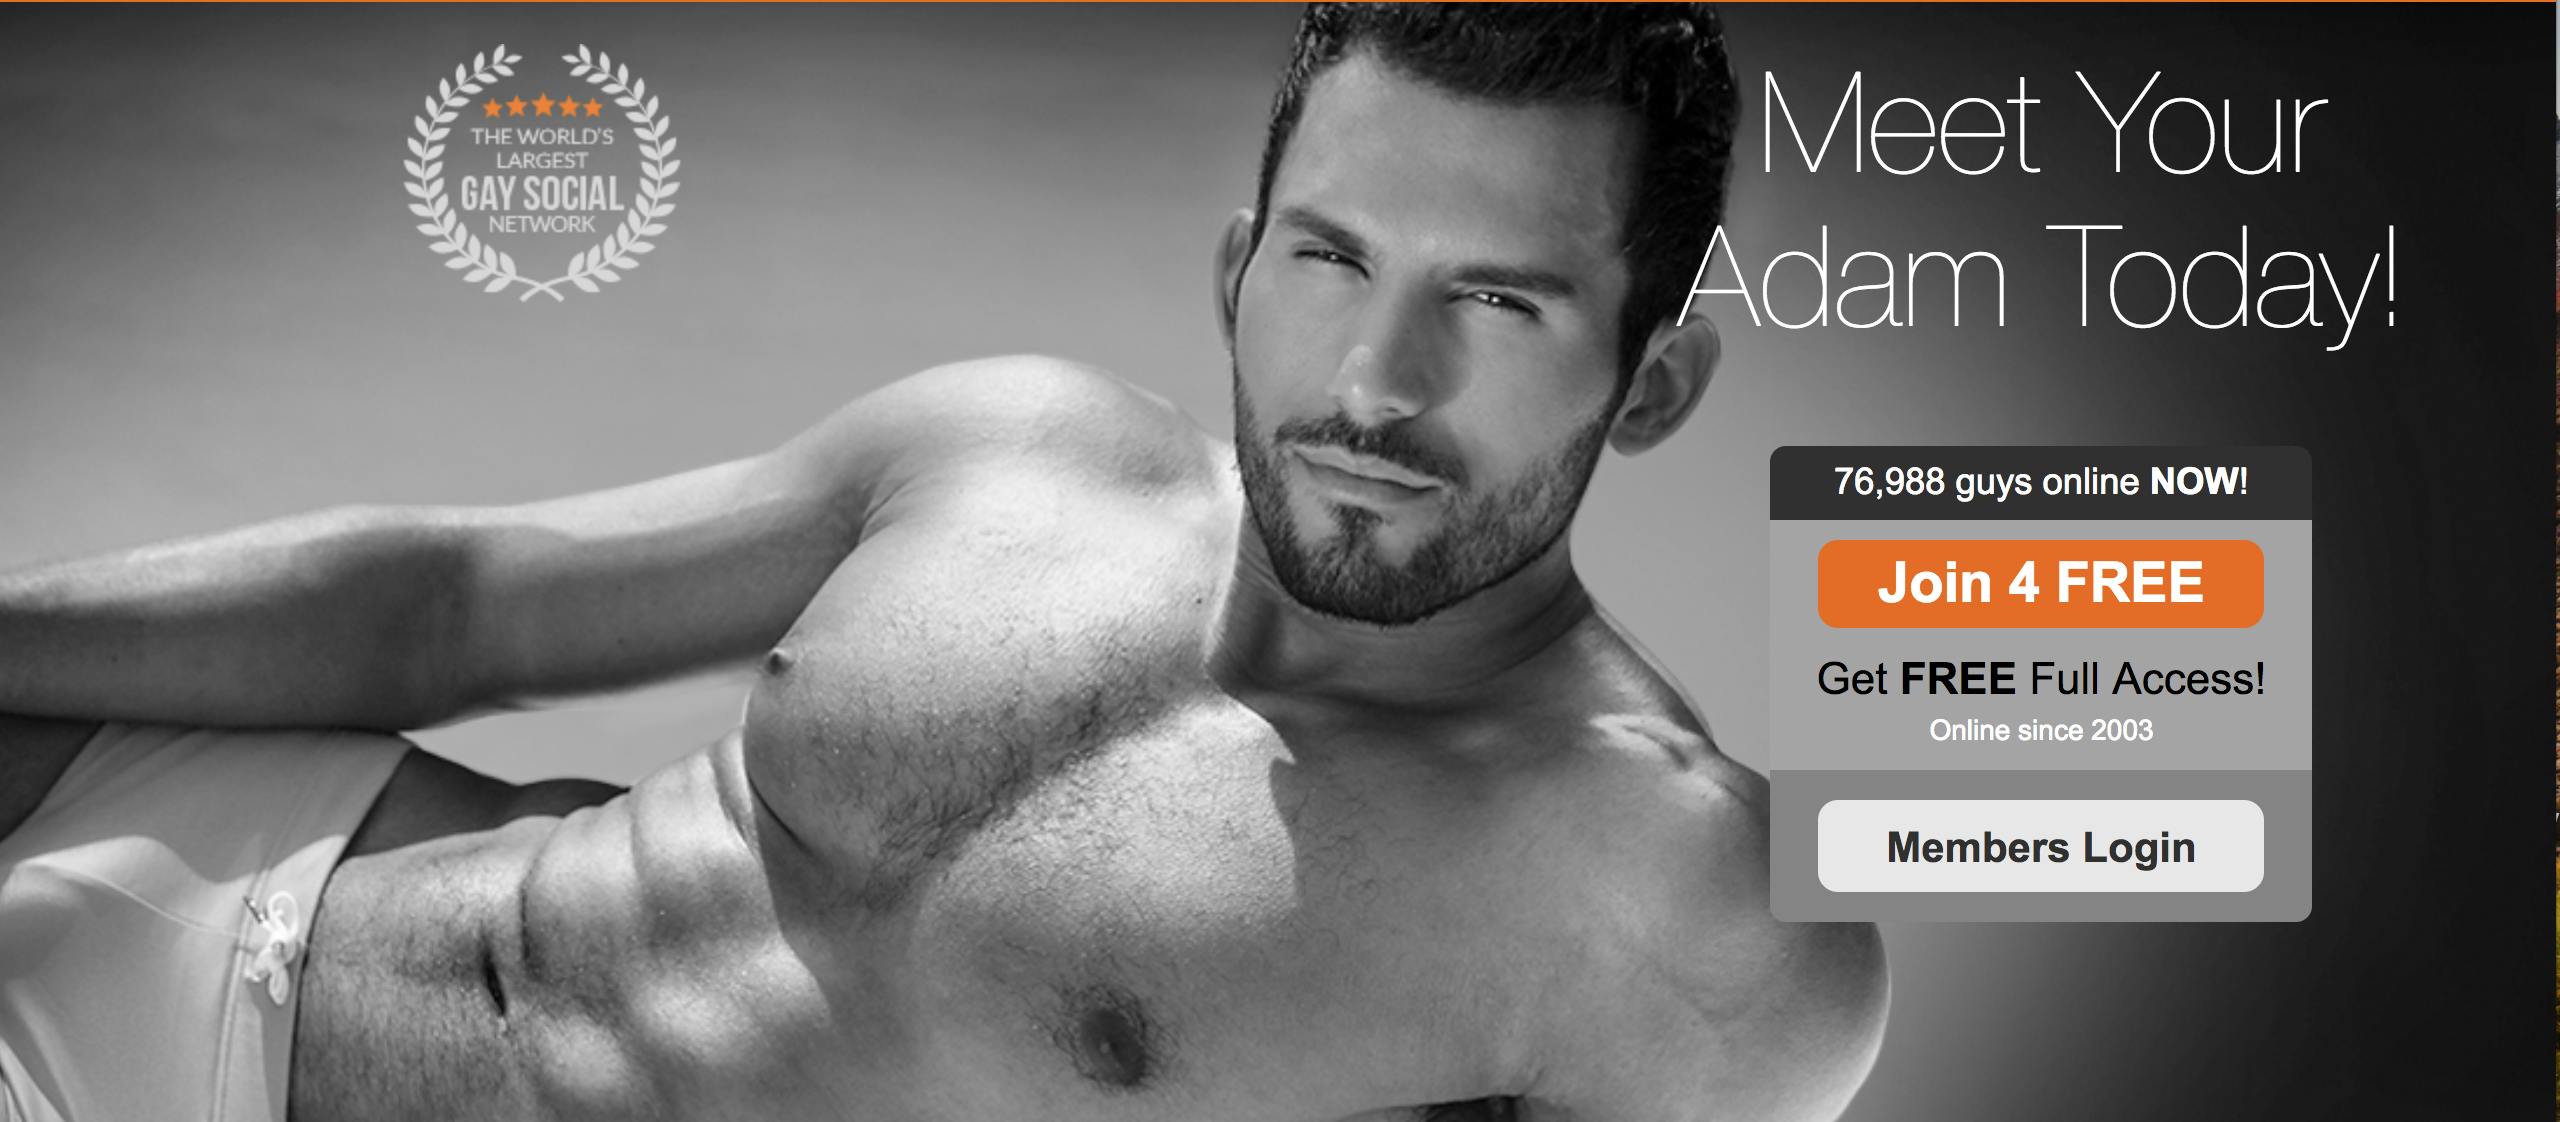 Best Gay Dating Sites Not For Hook Up